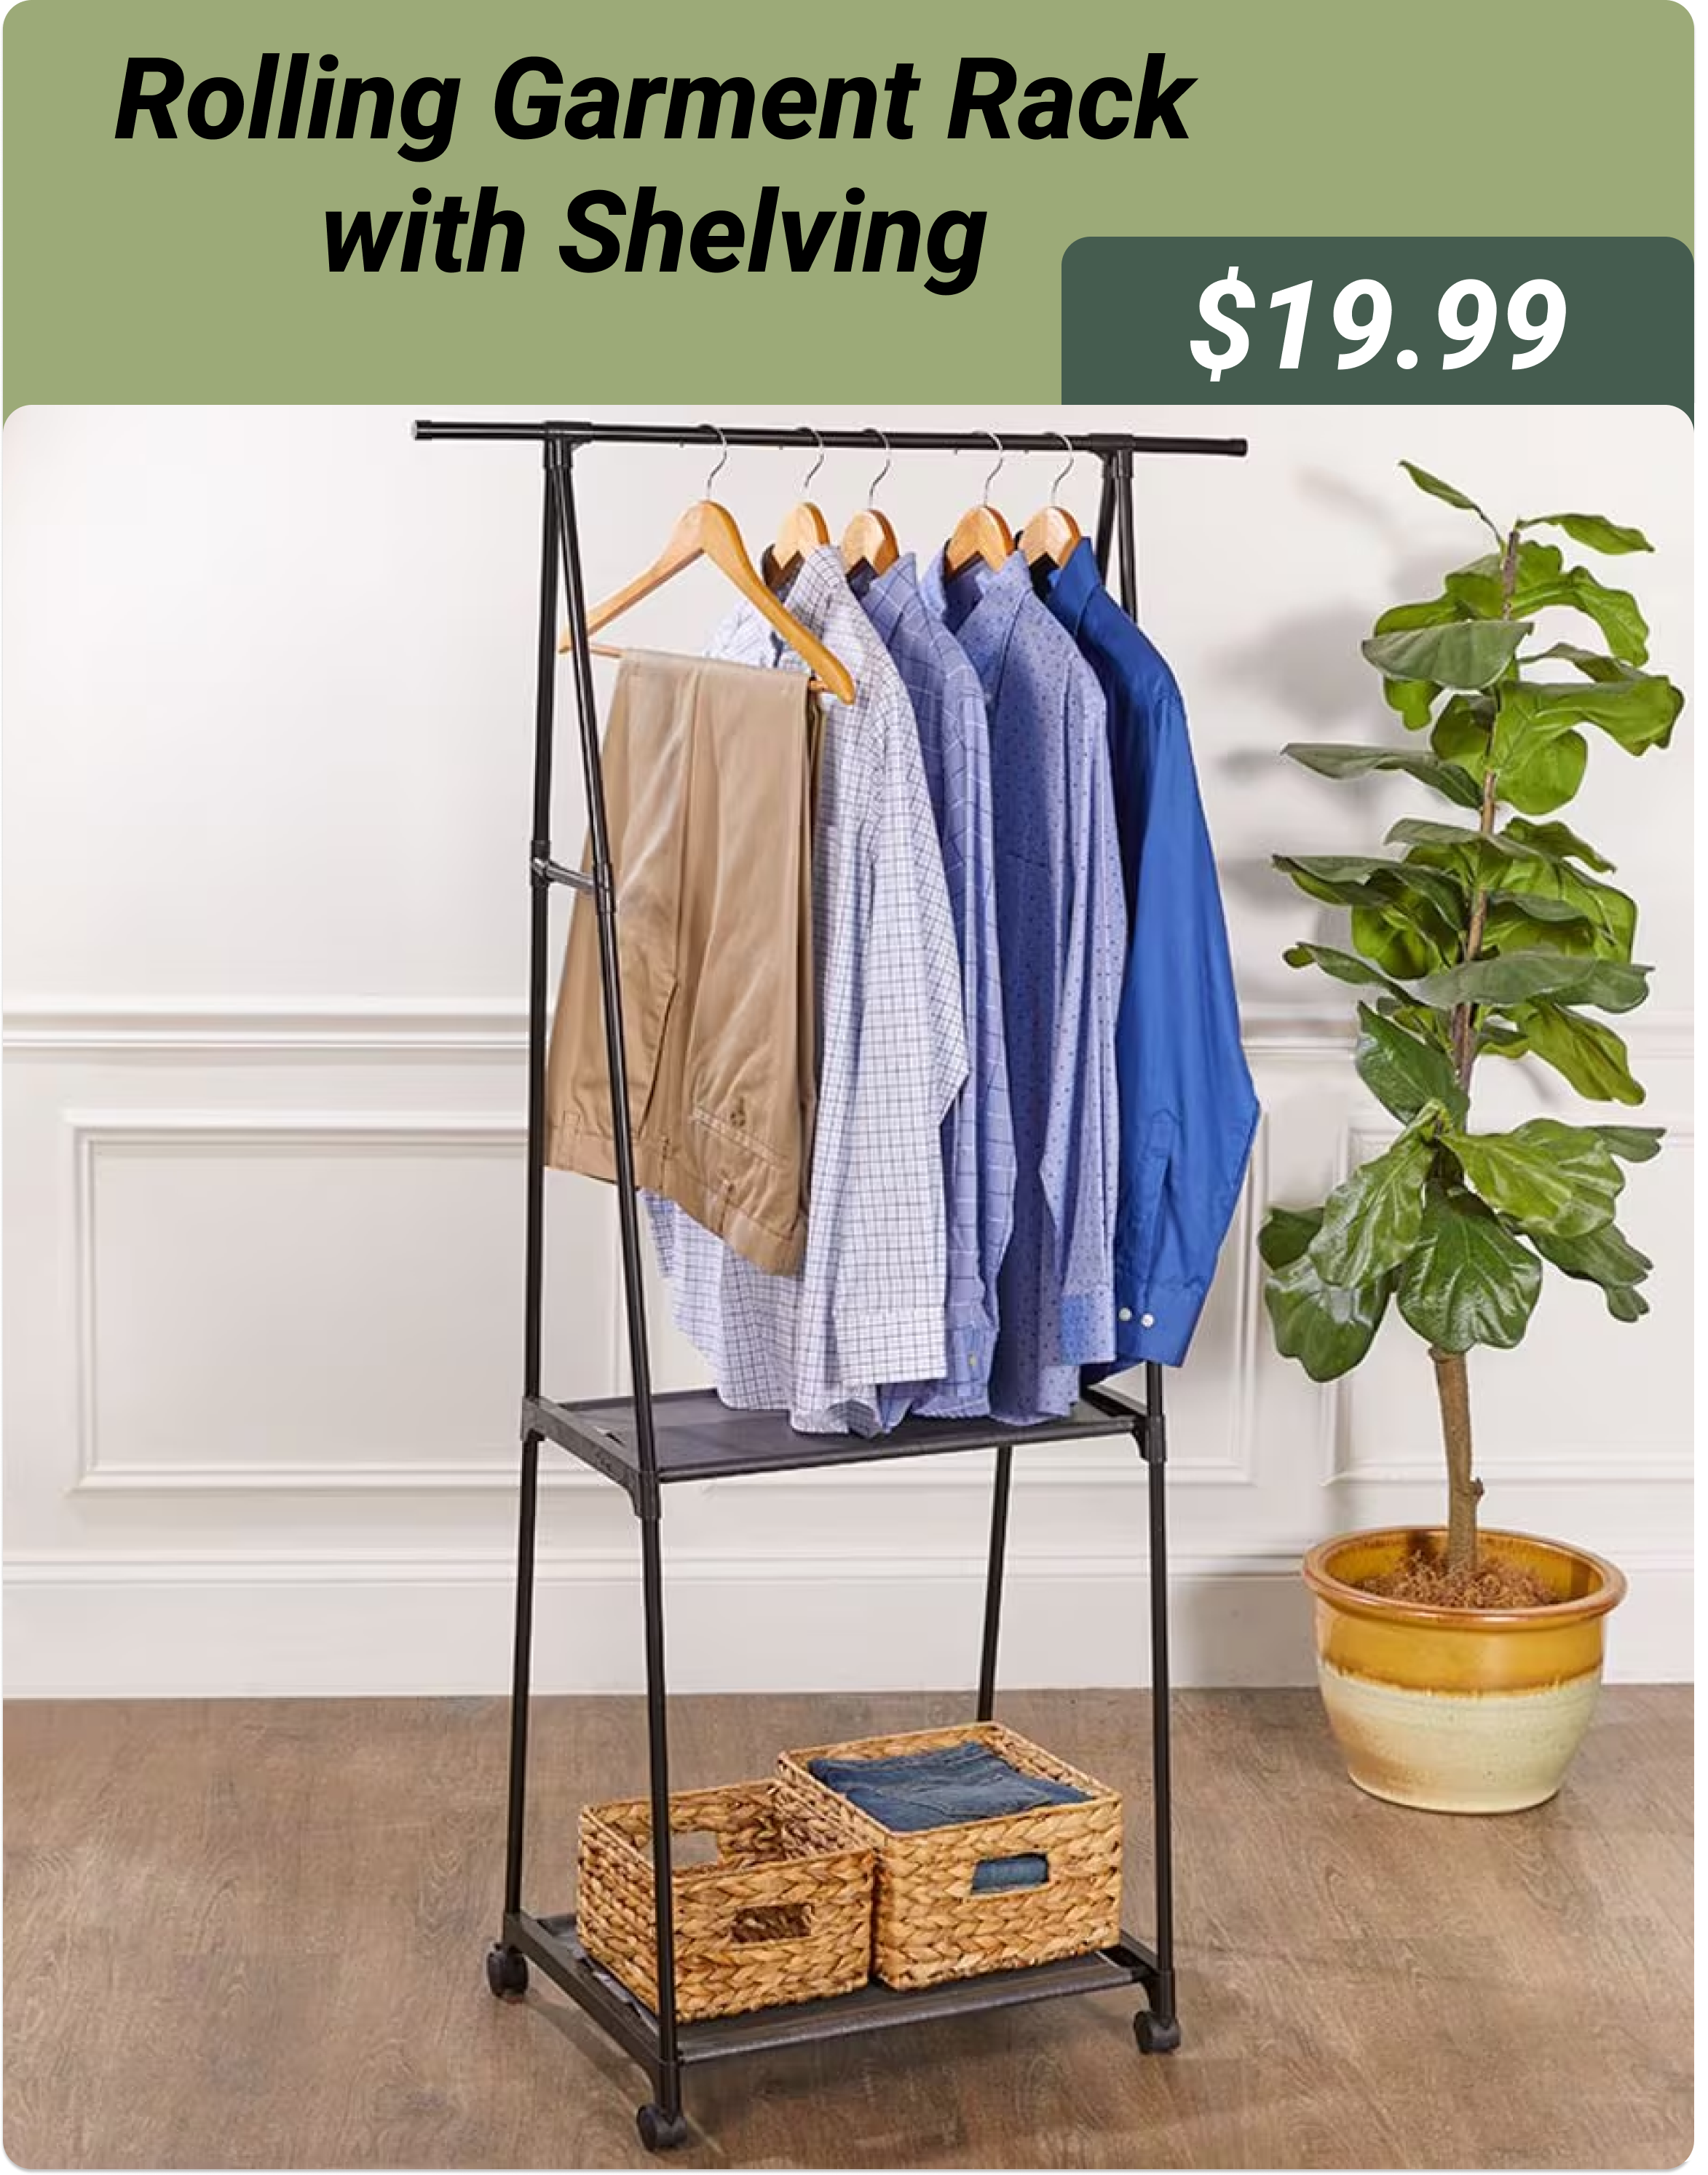 Rolling Garment Rack with Shelving